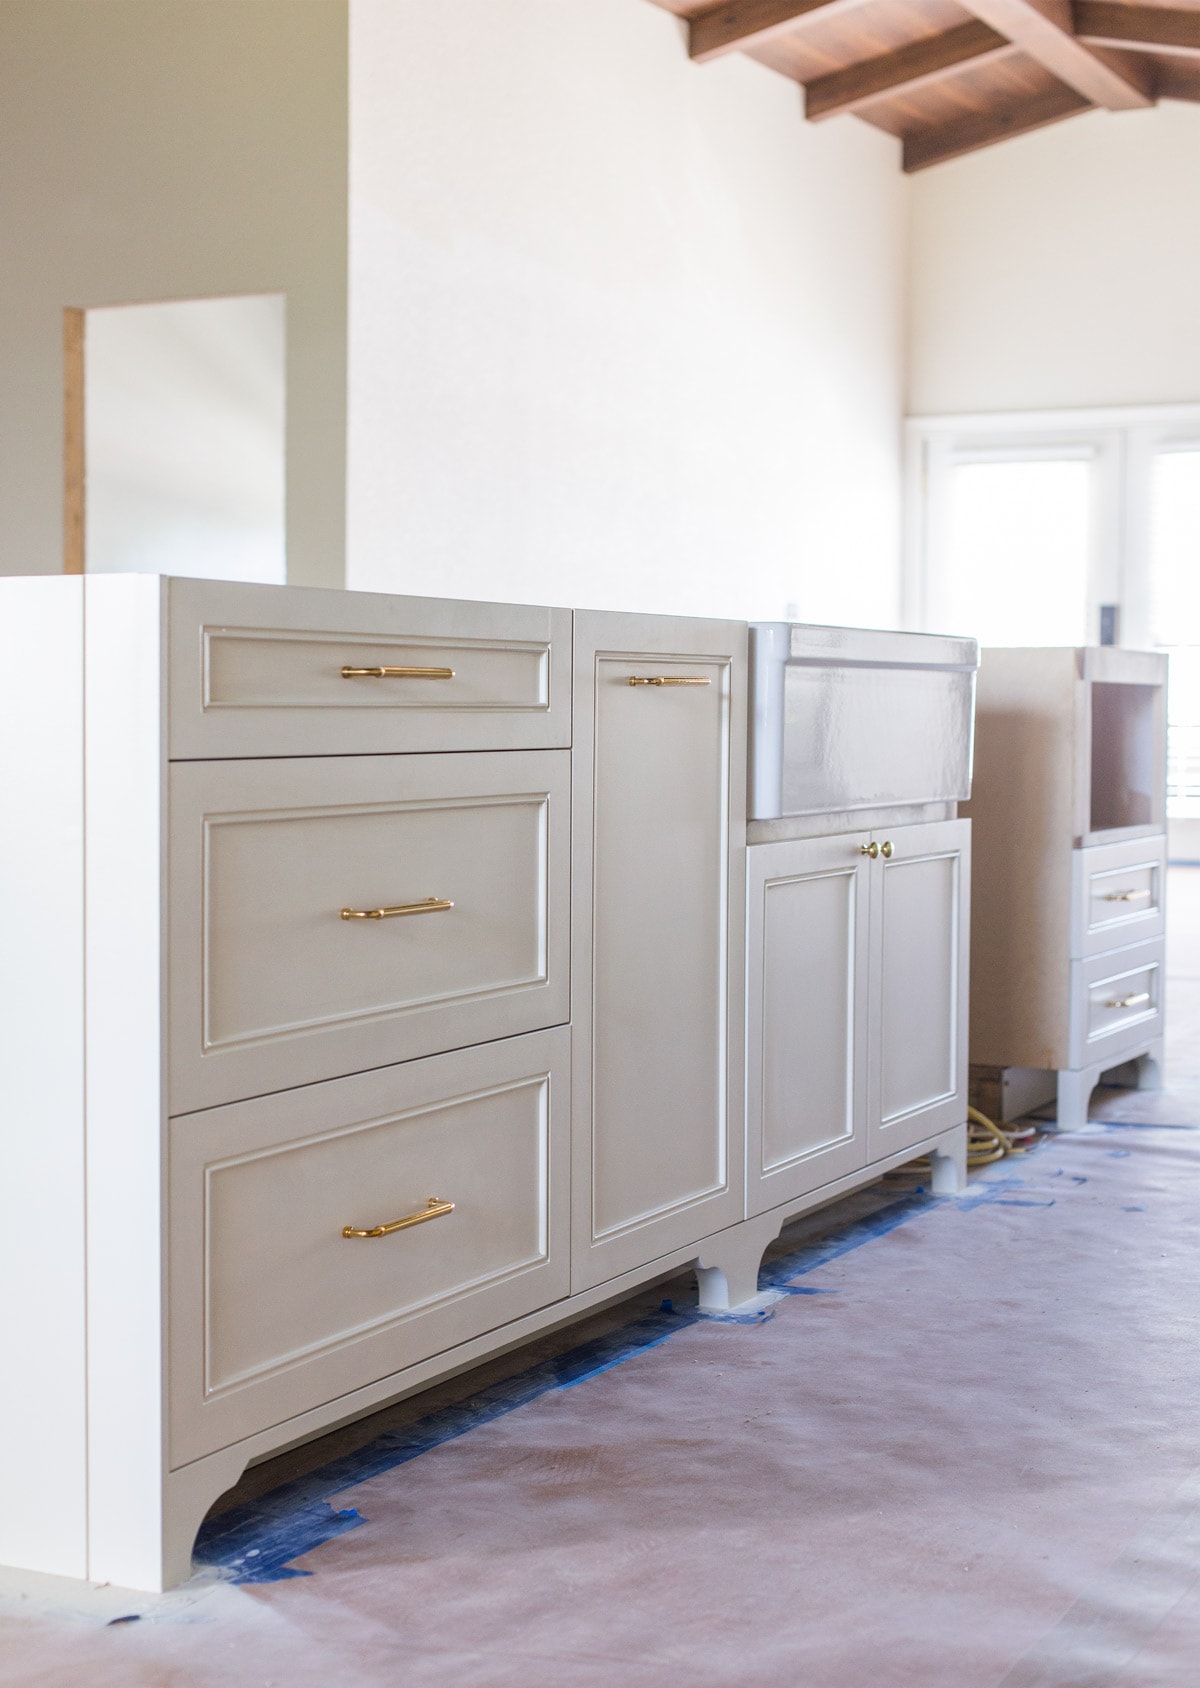 DIY Kitchen Cabinets Reveal with Nieu Cabinet Doors - Jenna Sue Design